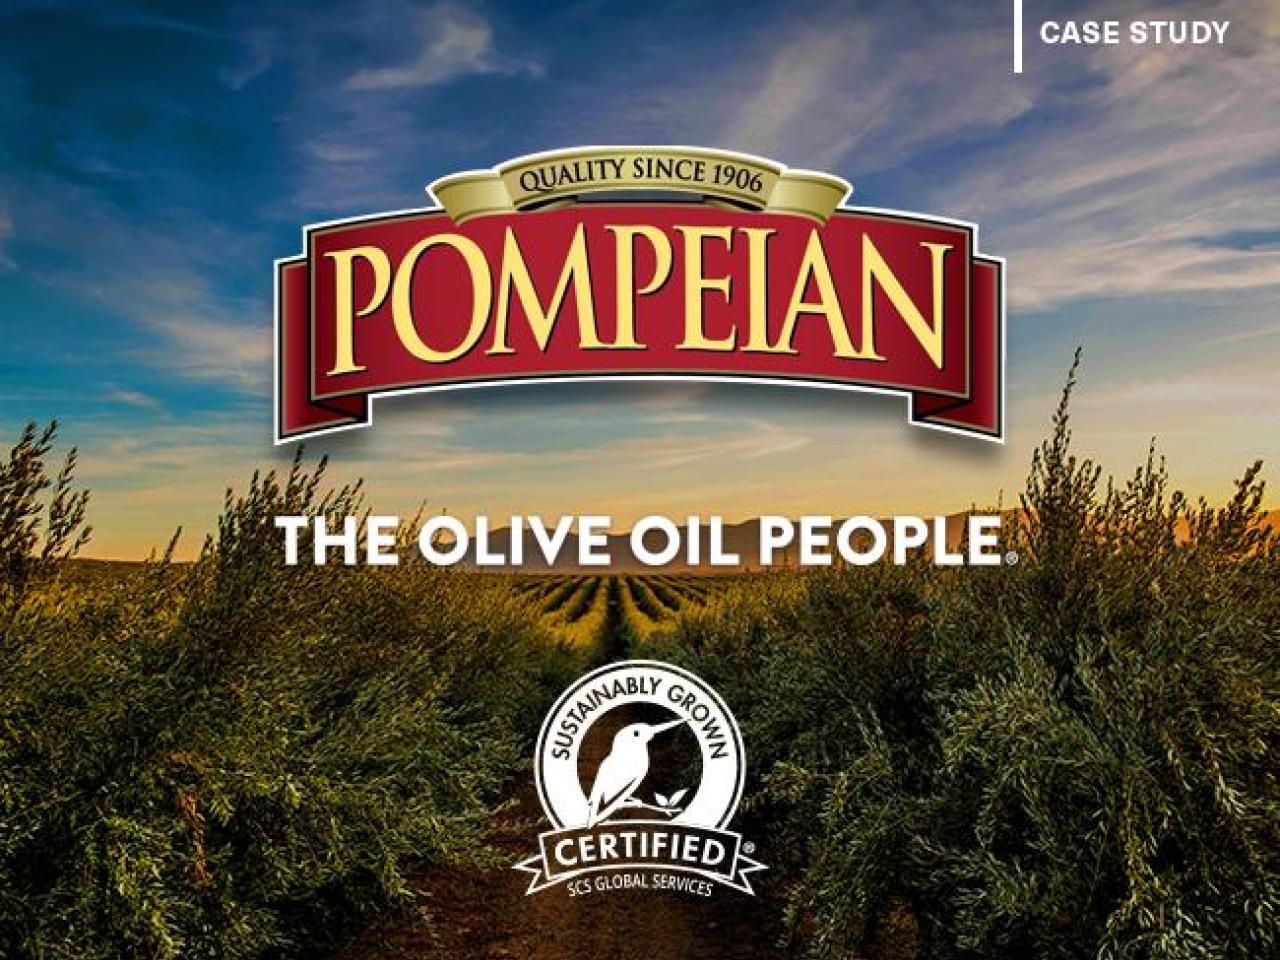 The Olive Oil people